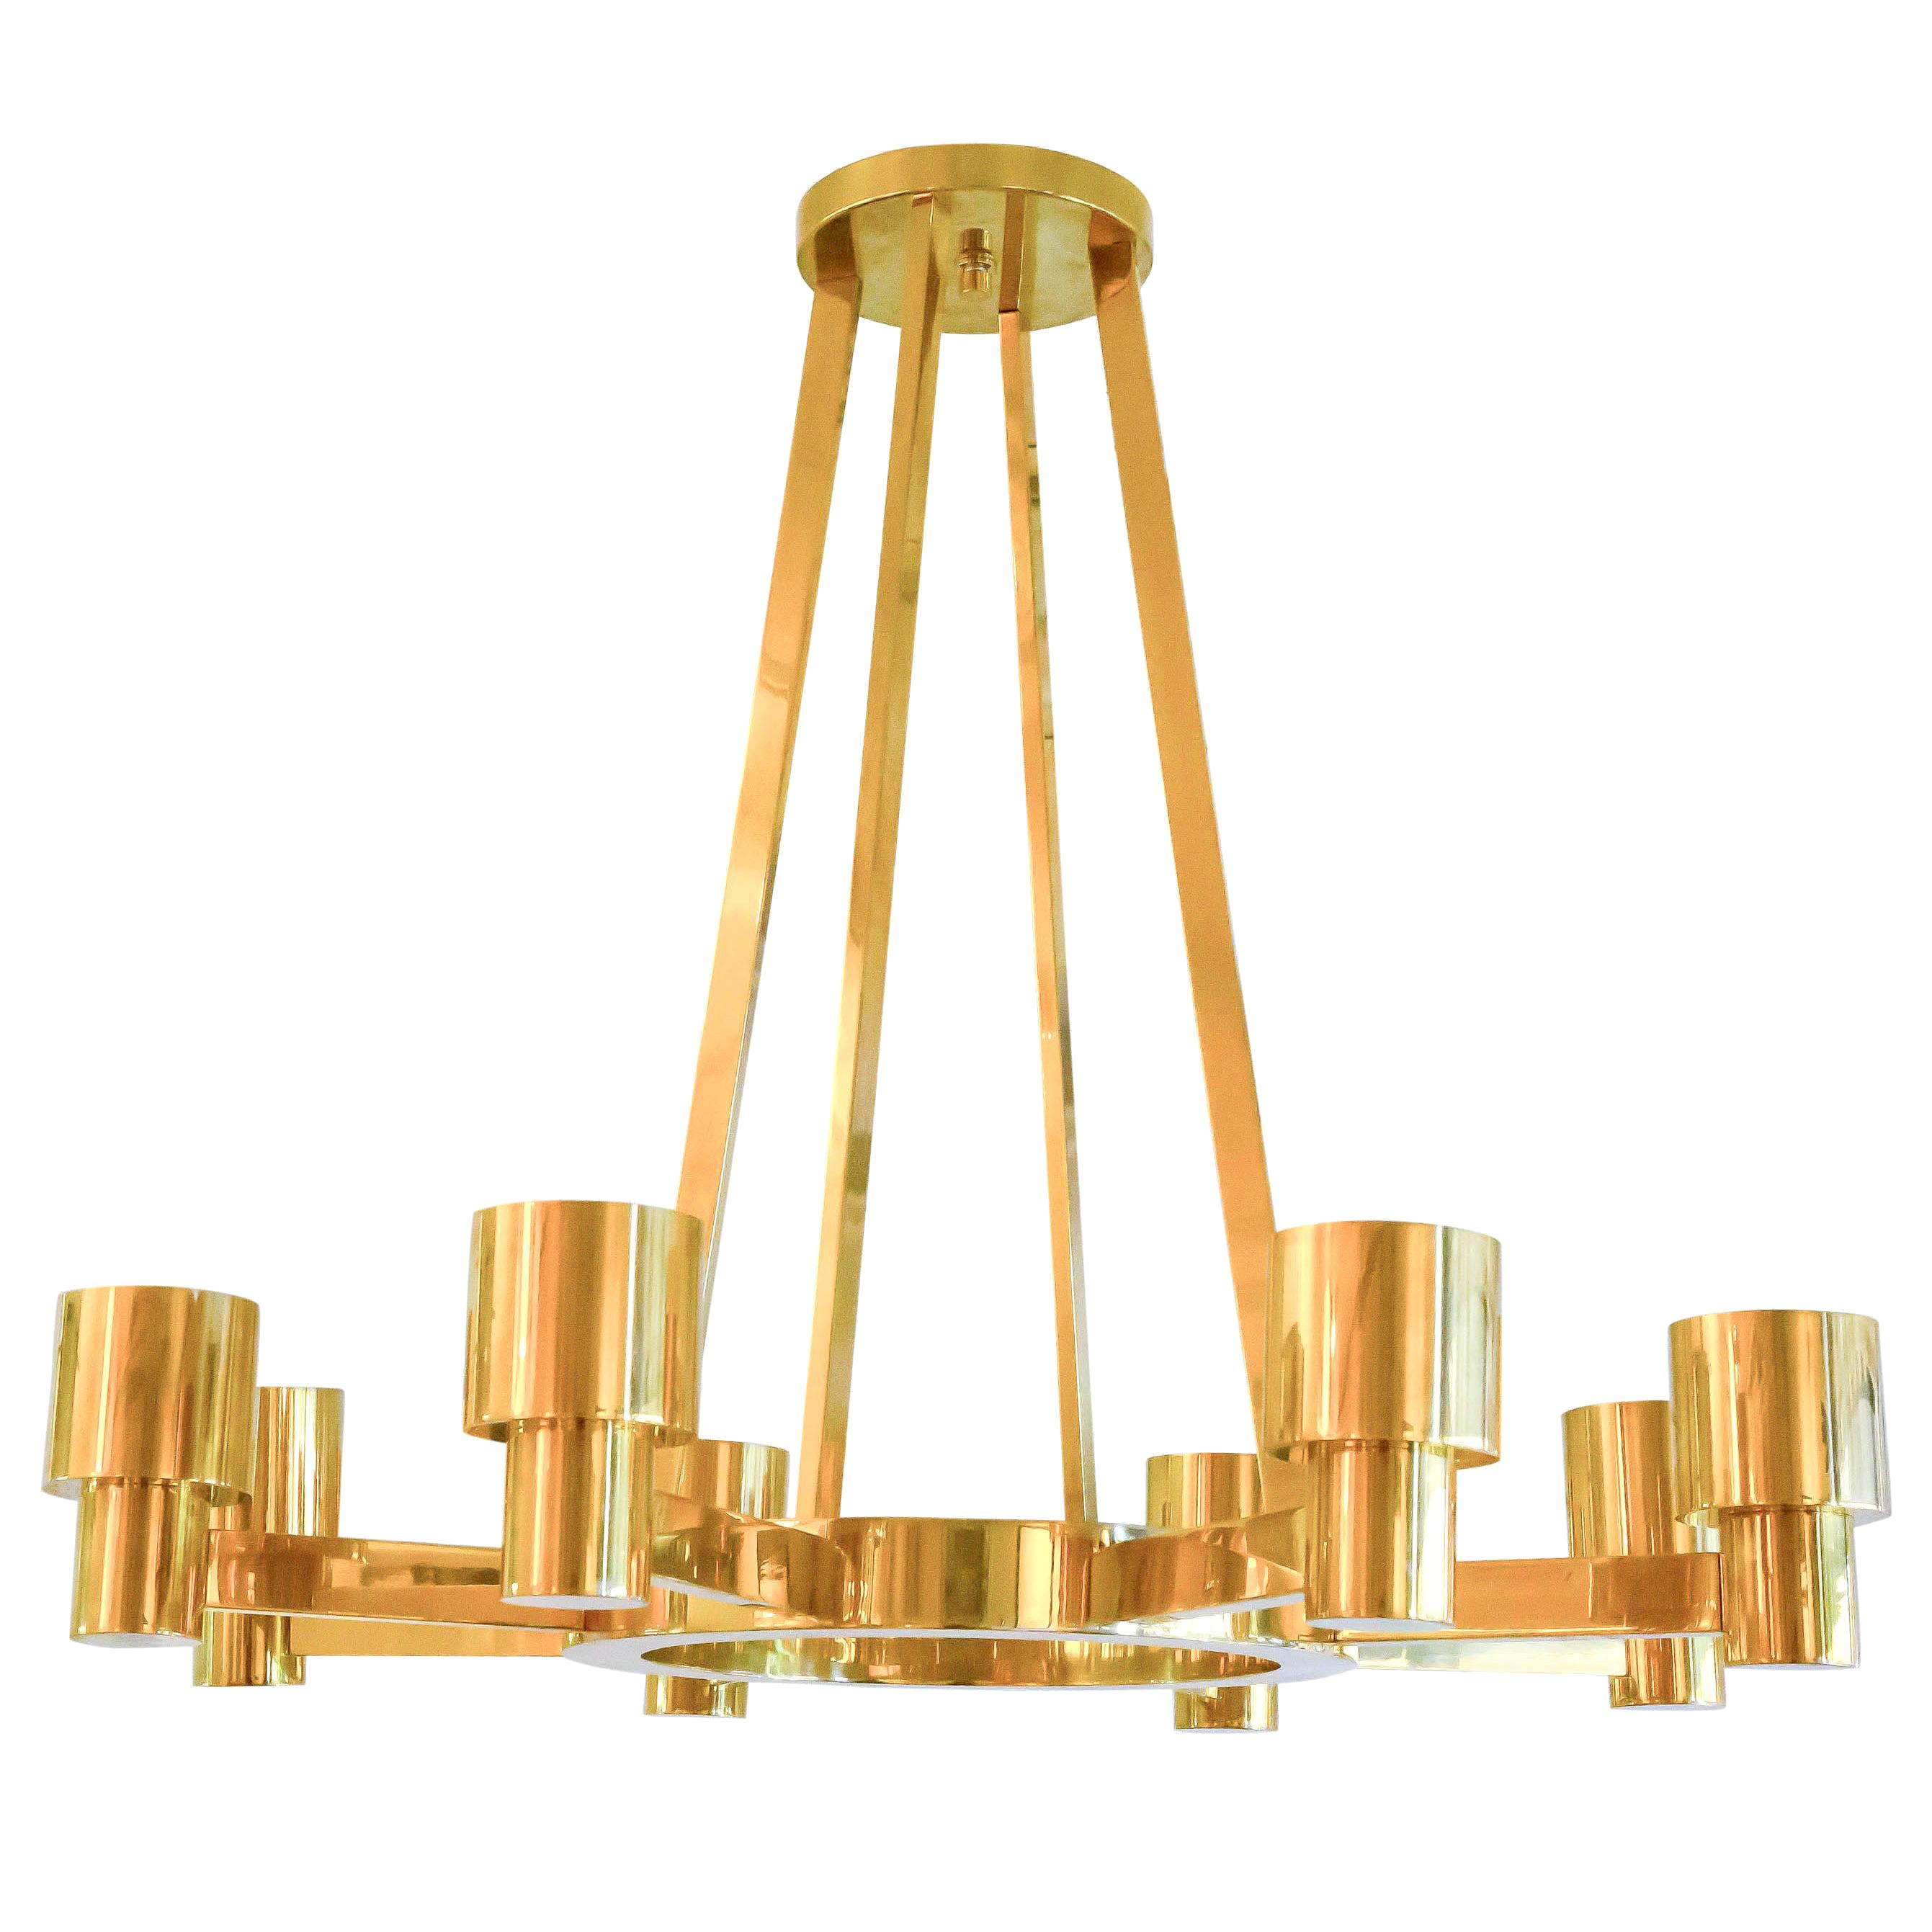 Custom Sculptural Brass Chandelier with Eight Arms